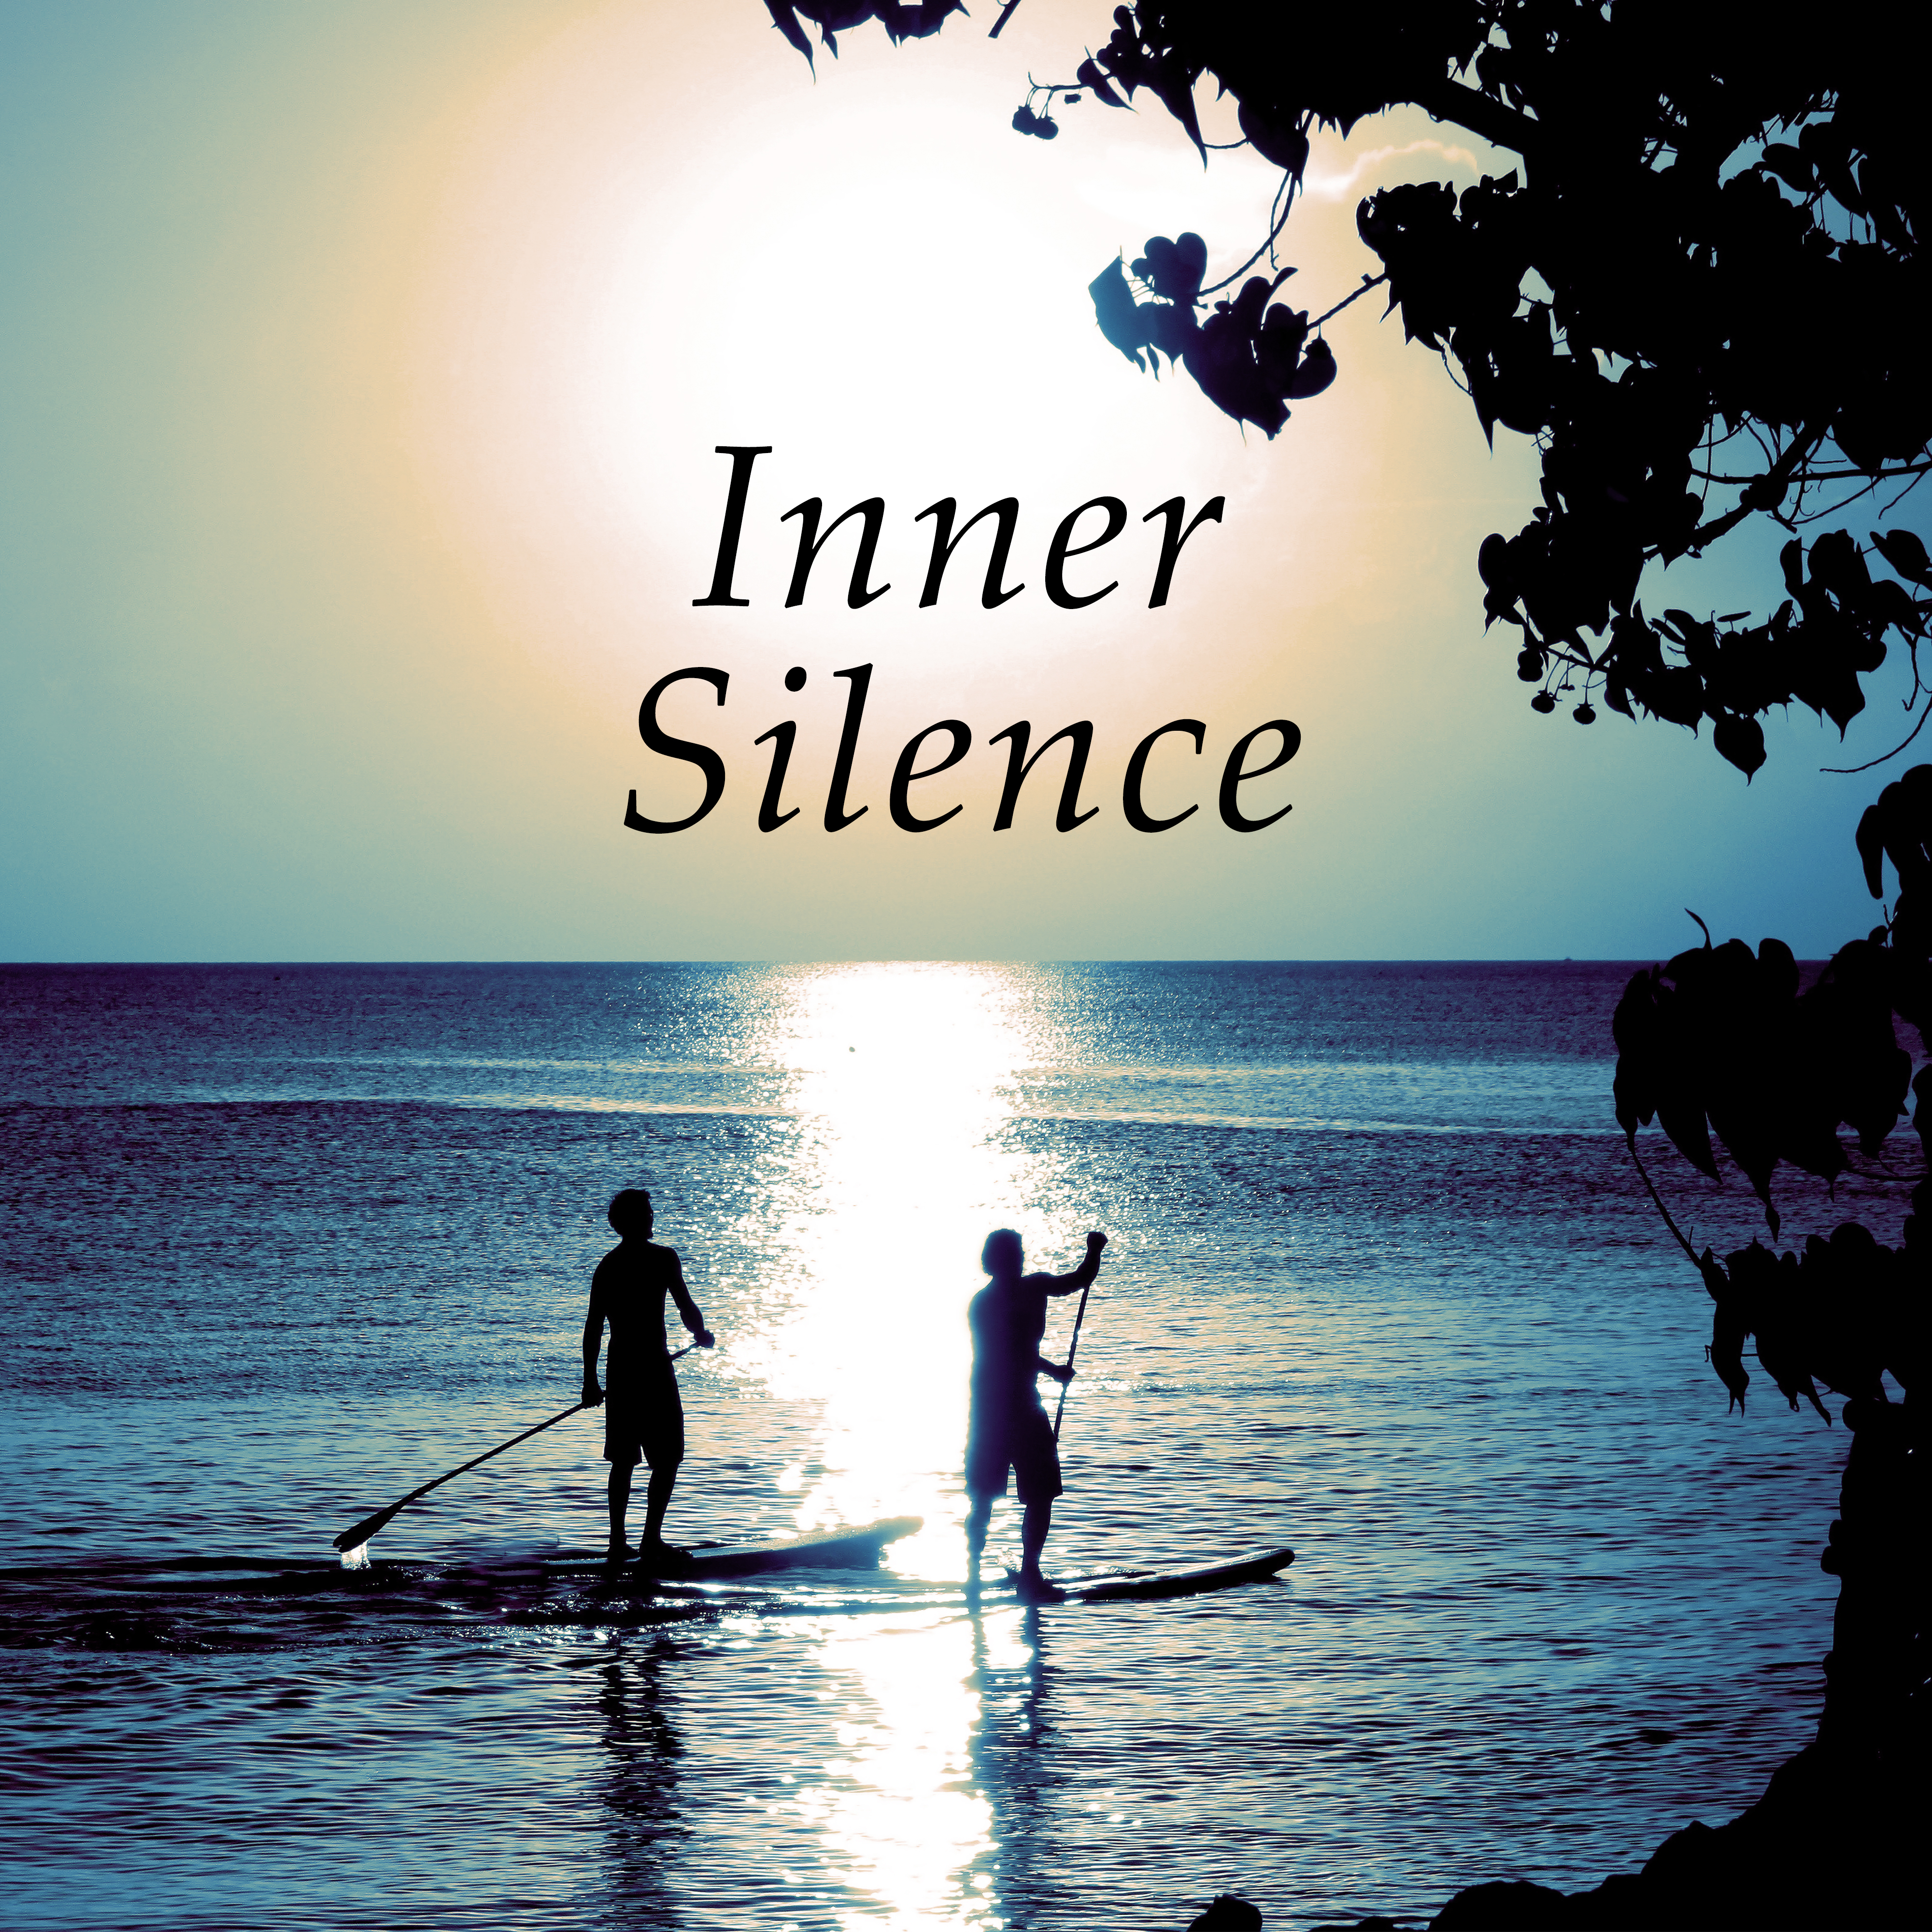 Inner Silence - Music to Help You Sleep, Soothing Background Music, Restful Sleep, Inner Peace, Yoga & Relaxation Meditation, Calming Piano Music